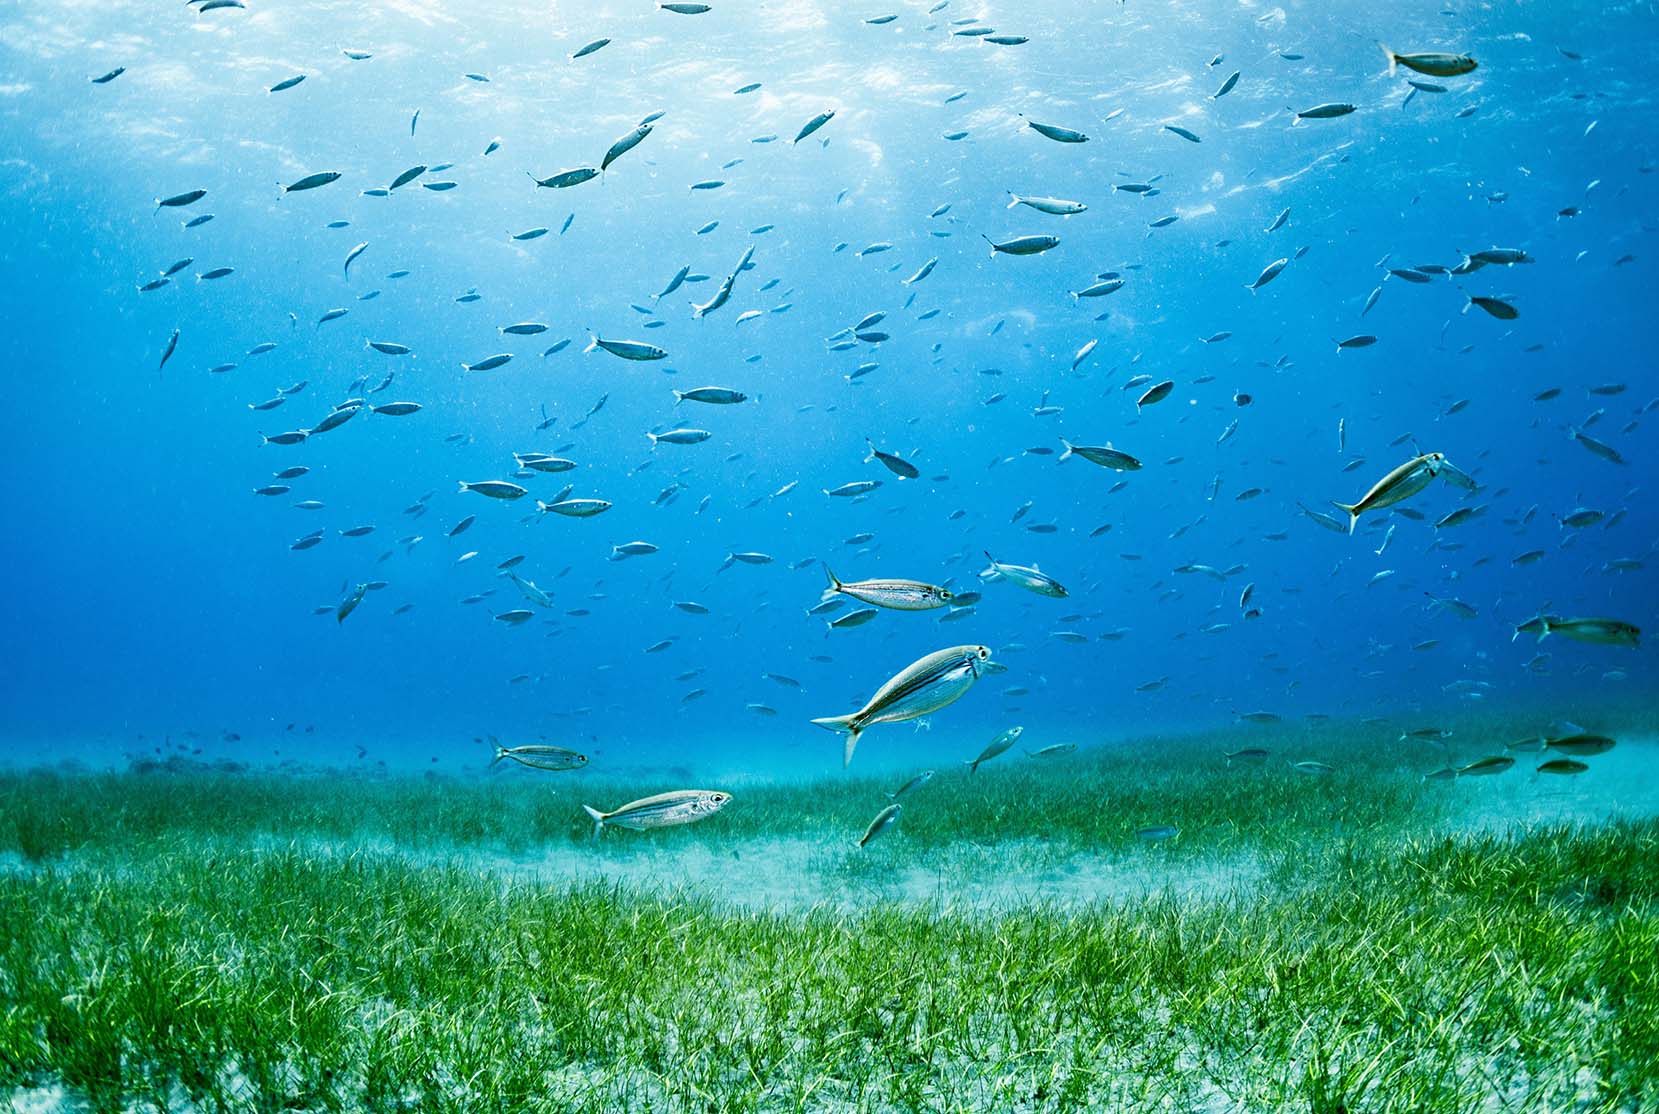 School of Bogue (Boops boops) over seagrass